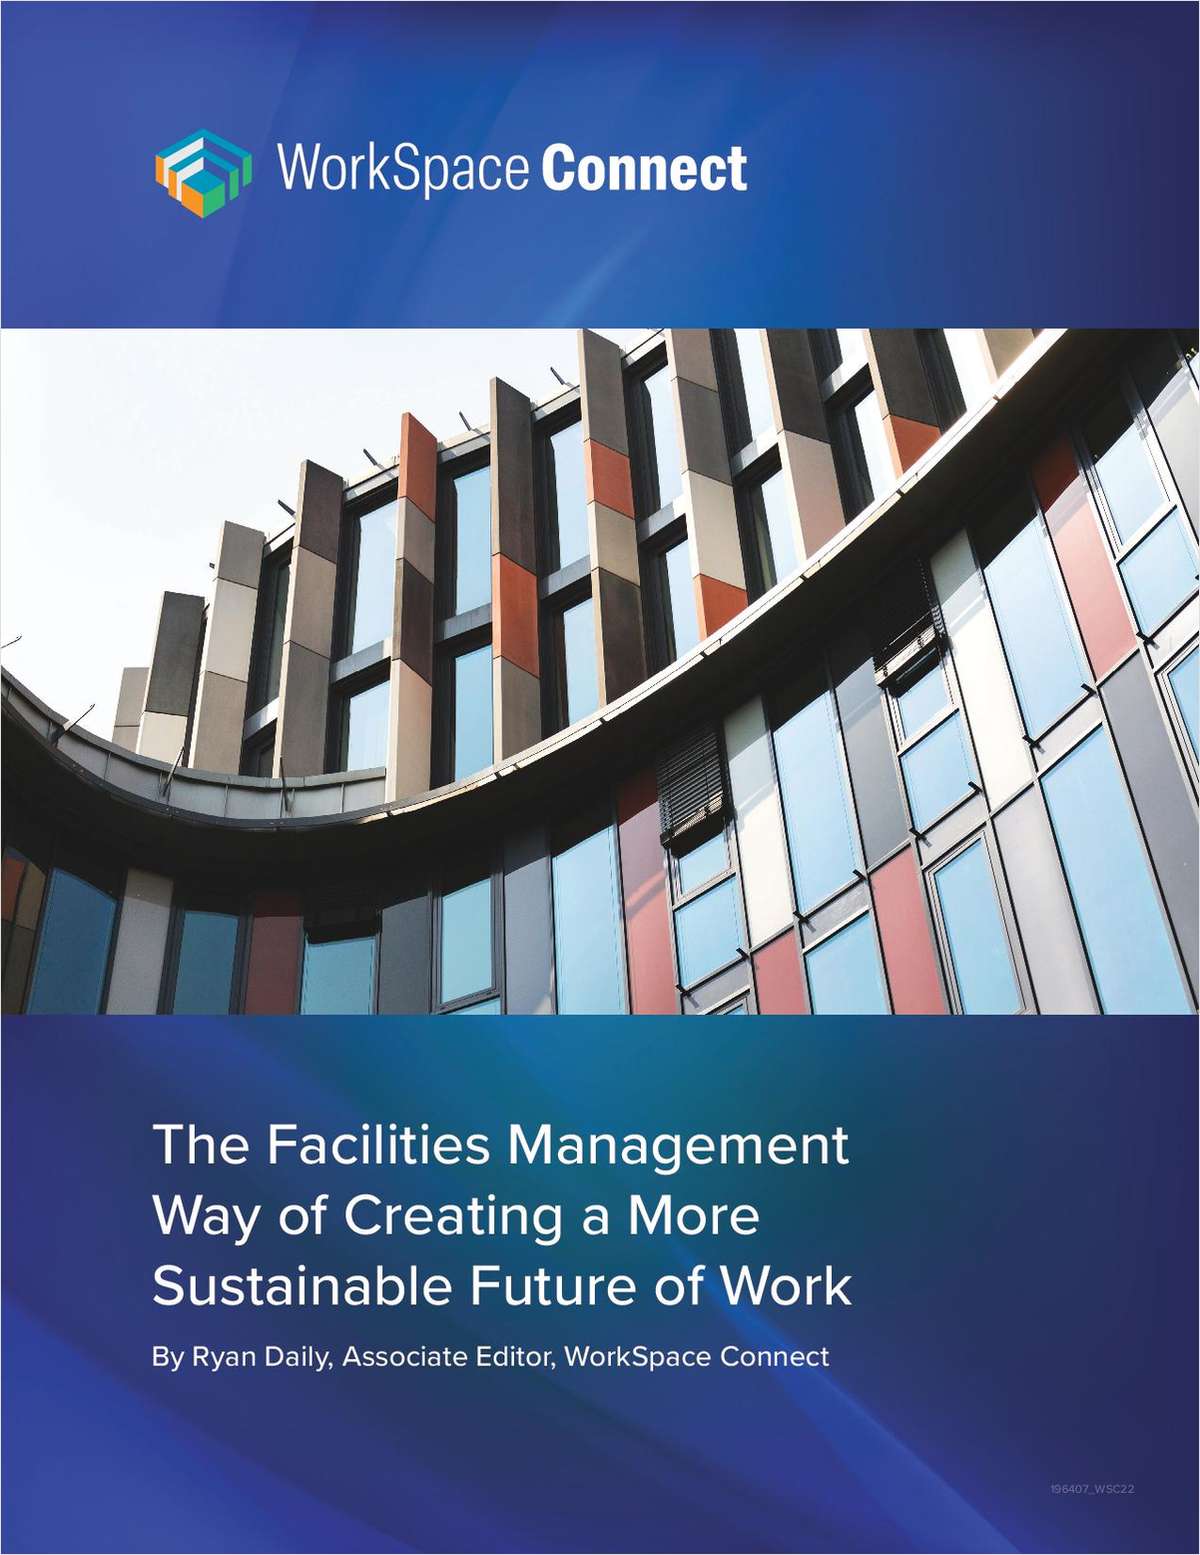 The Facilities Management Way Of Creating A More Sustainable Future of Work